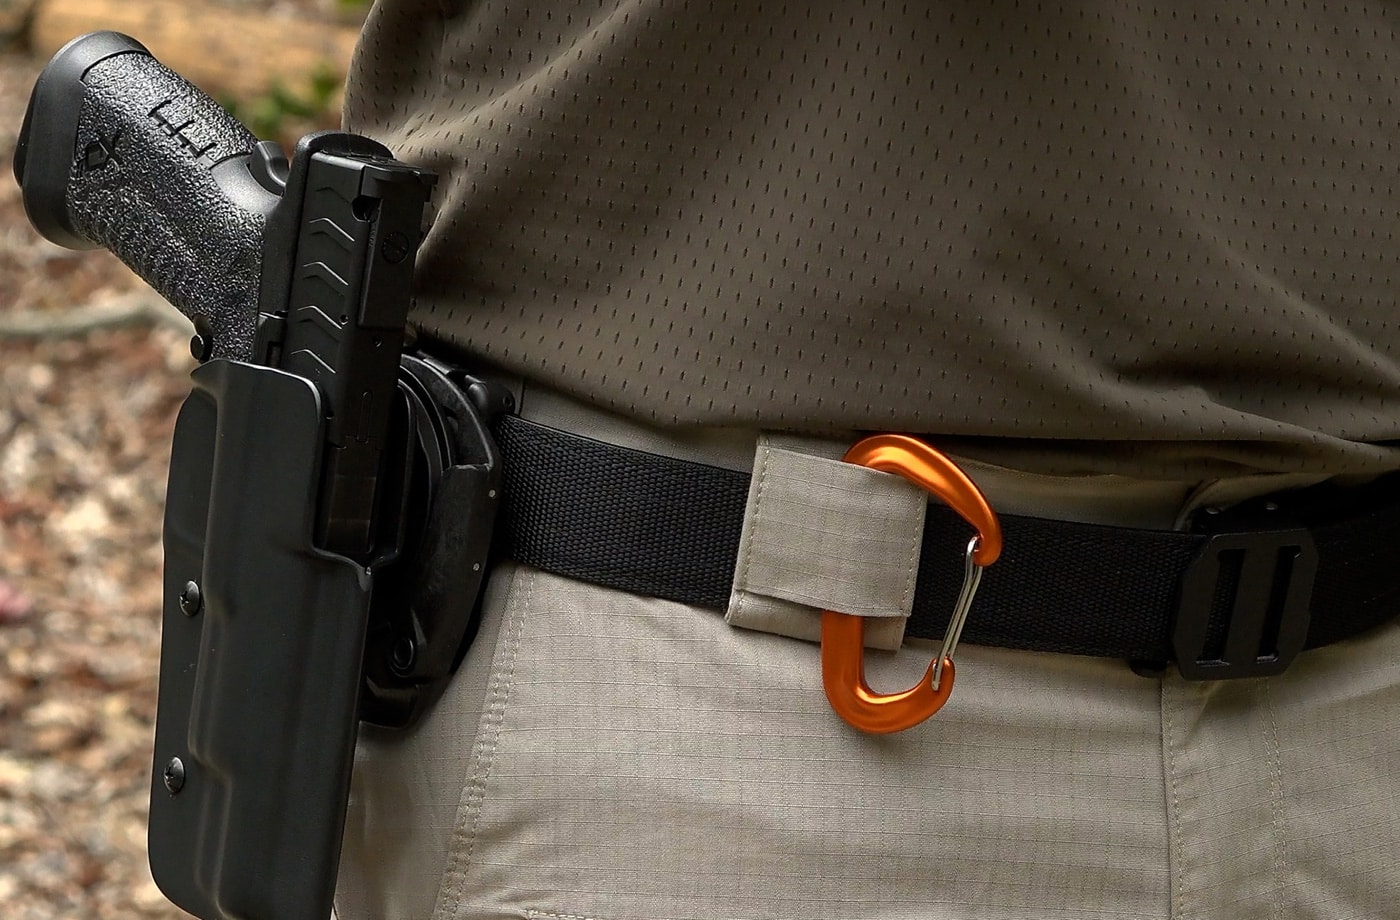 kore belt review ccw concealed carry personal protection